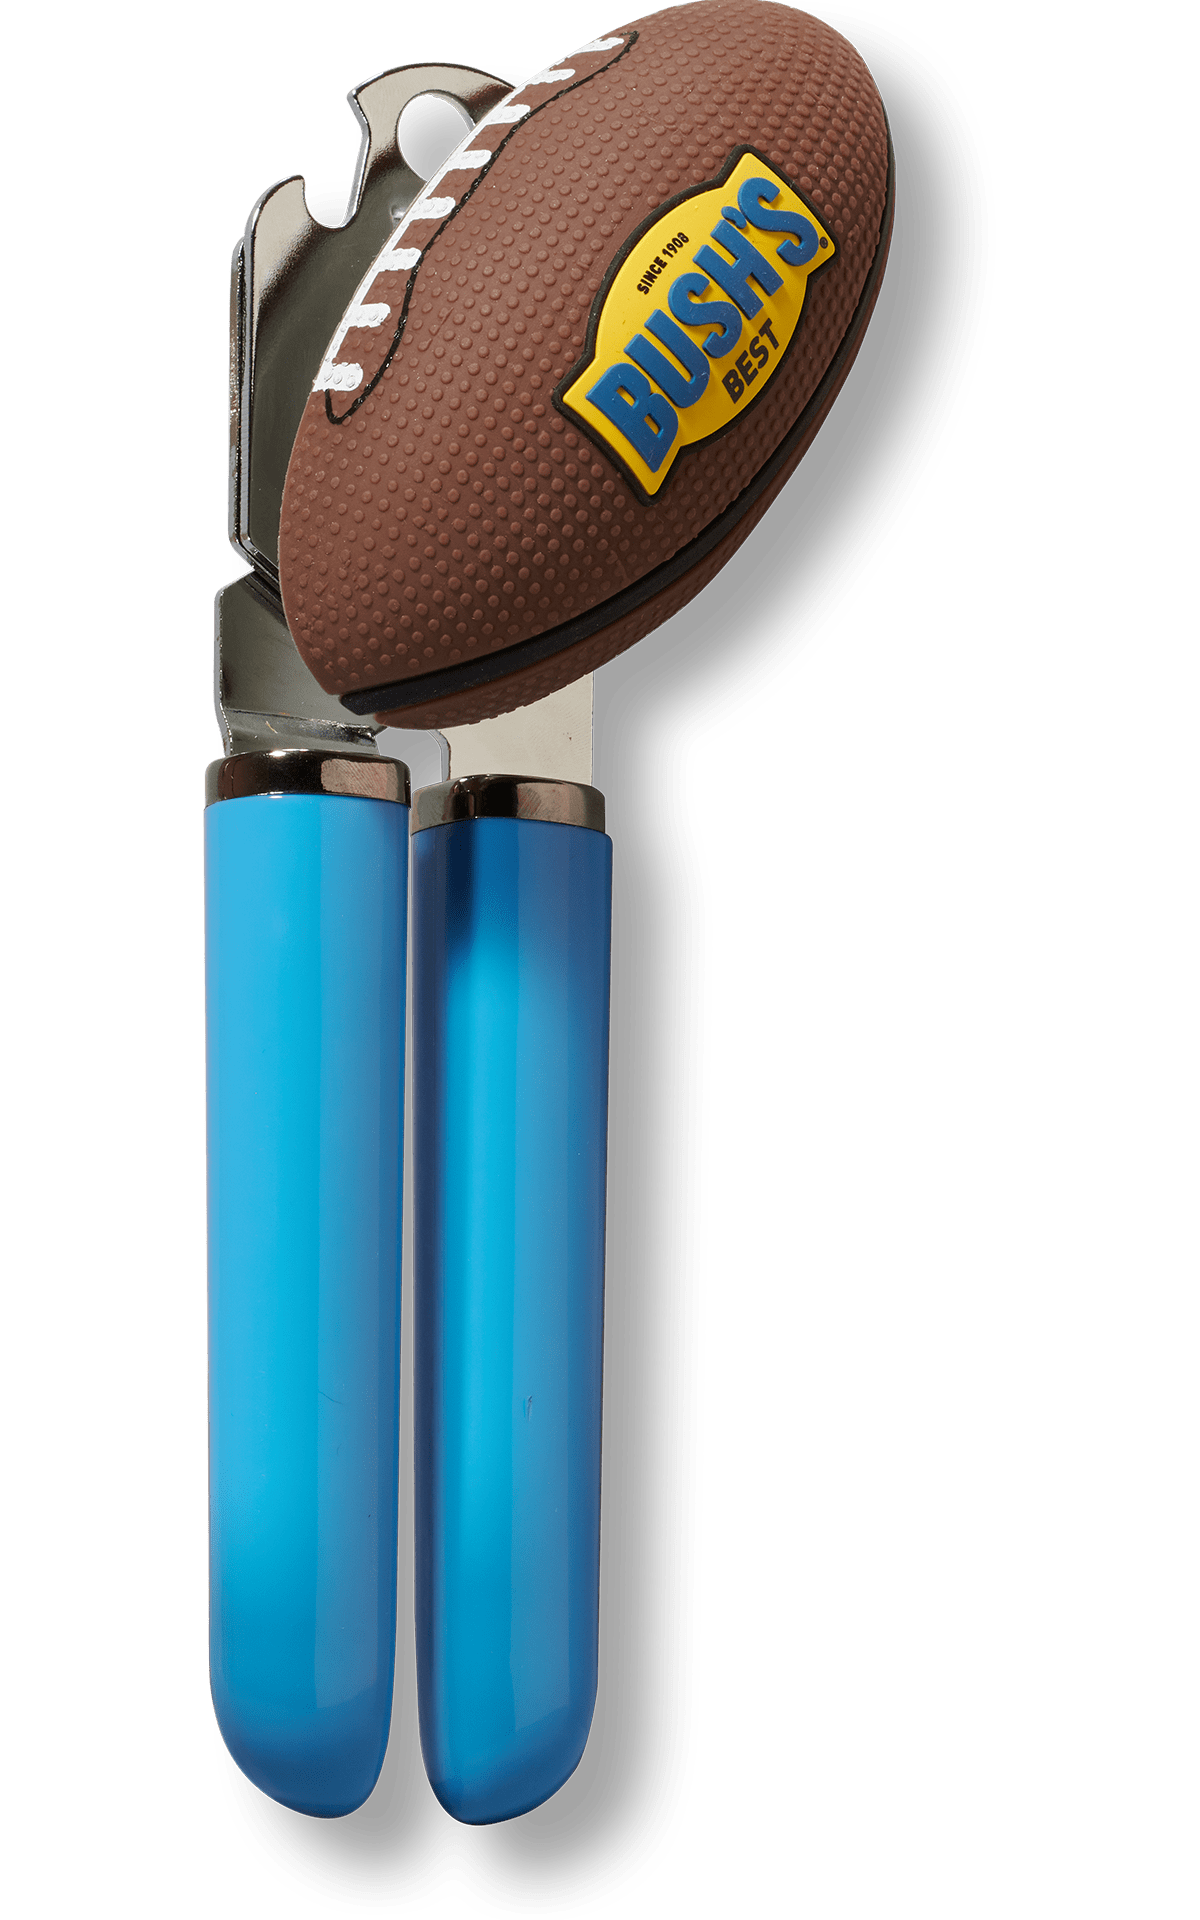 Can opener with blue handles and football-shaped crank